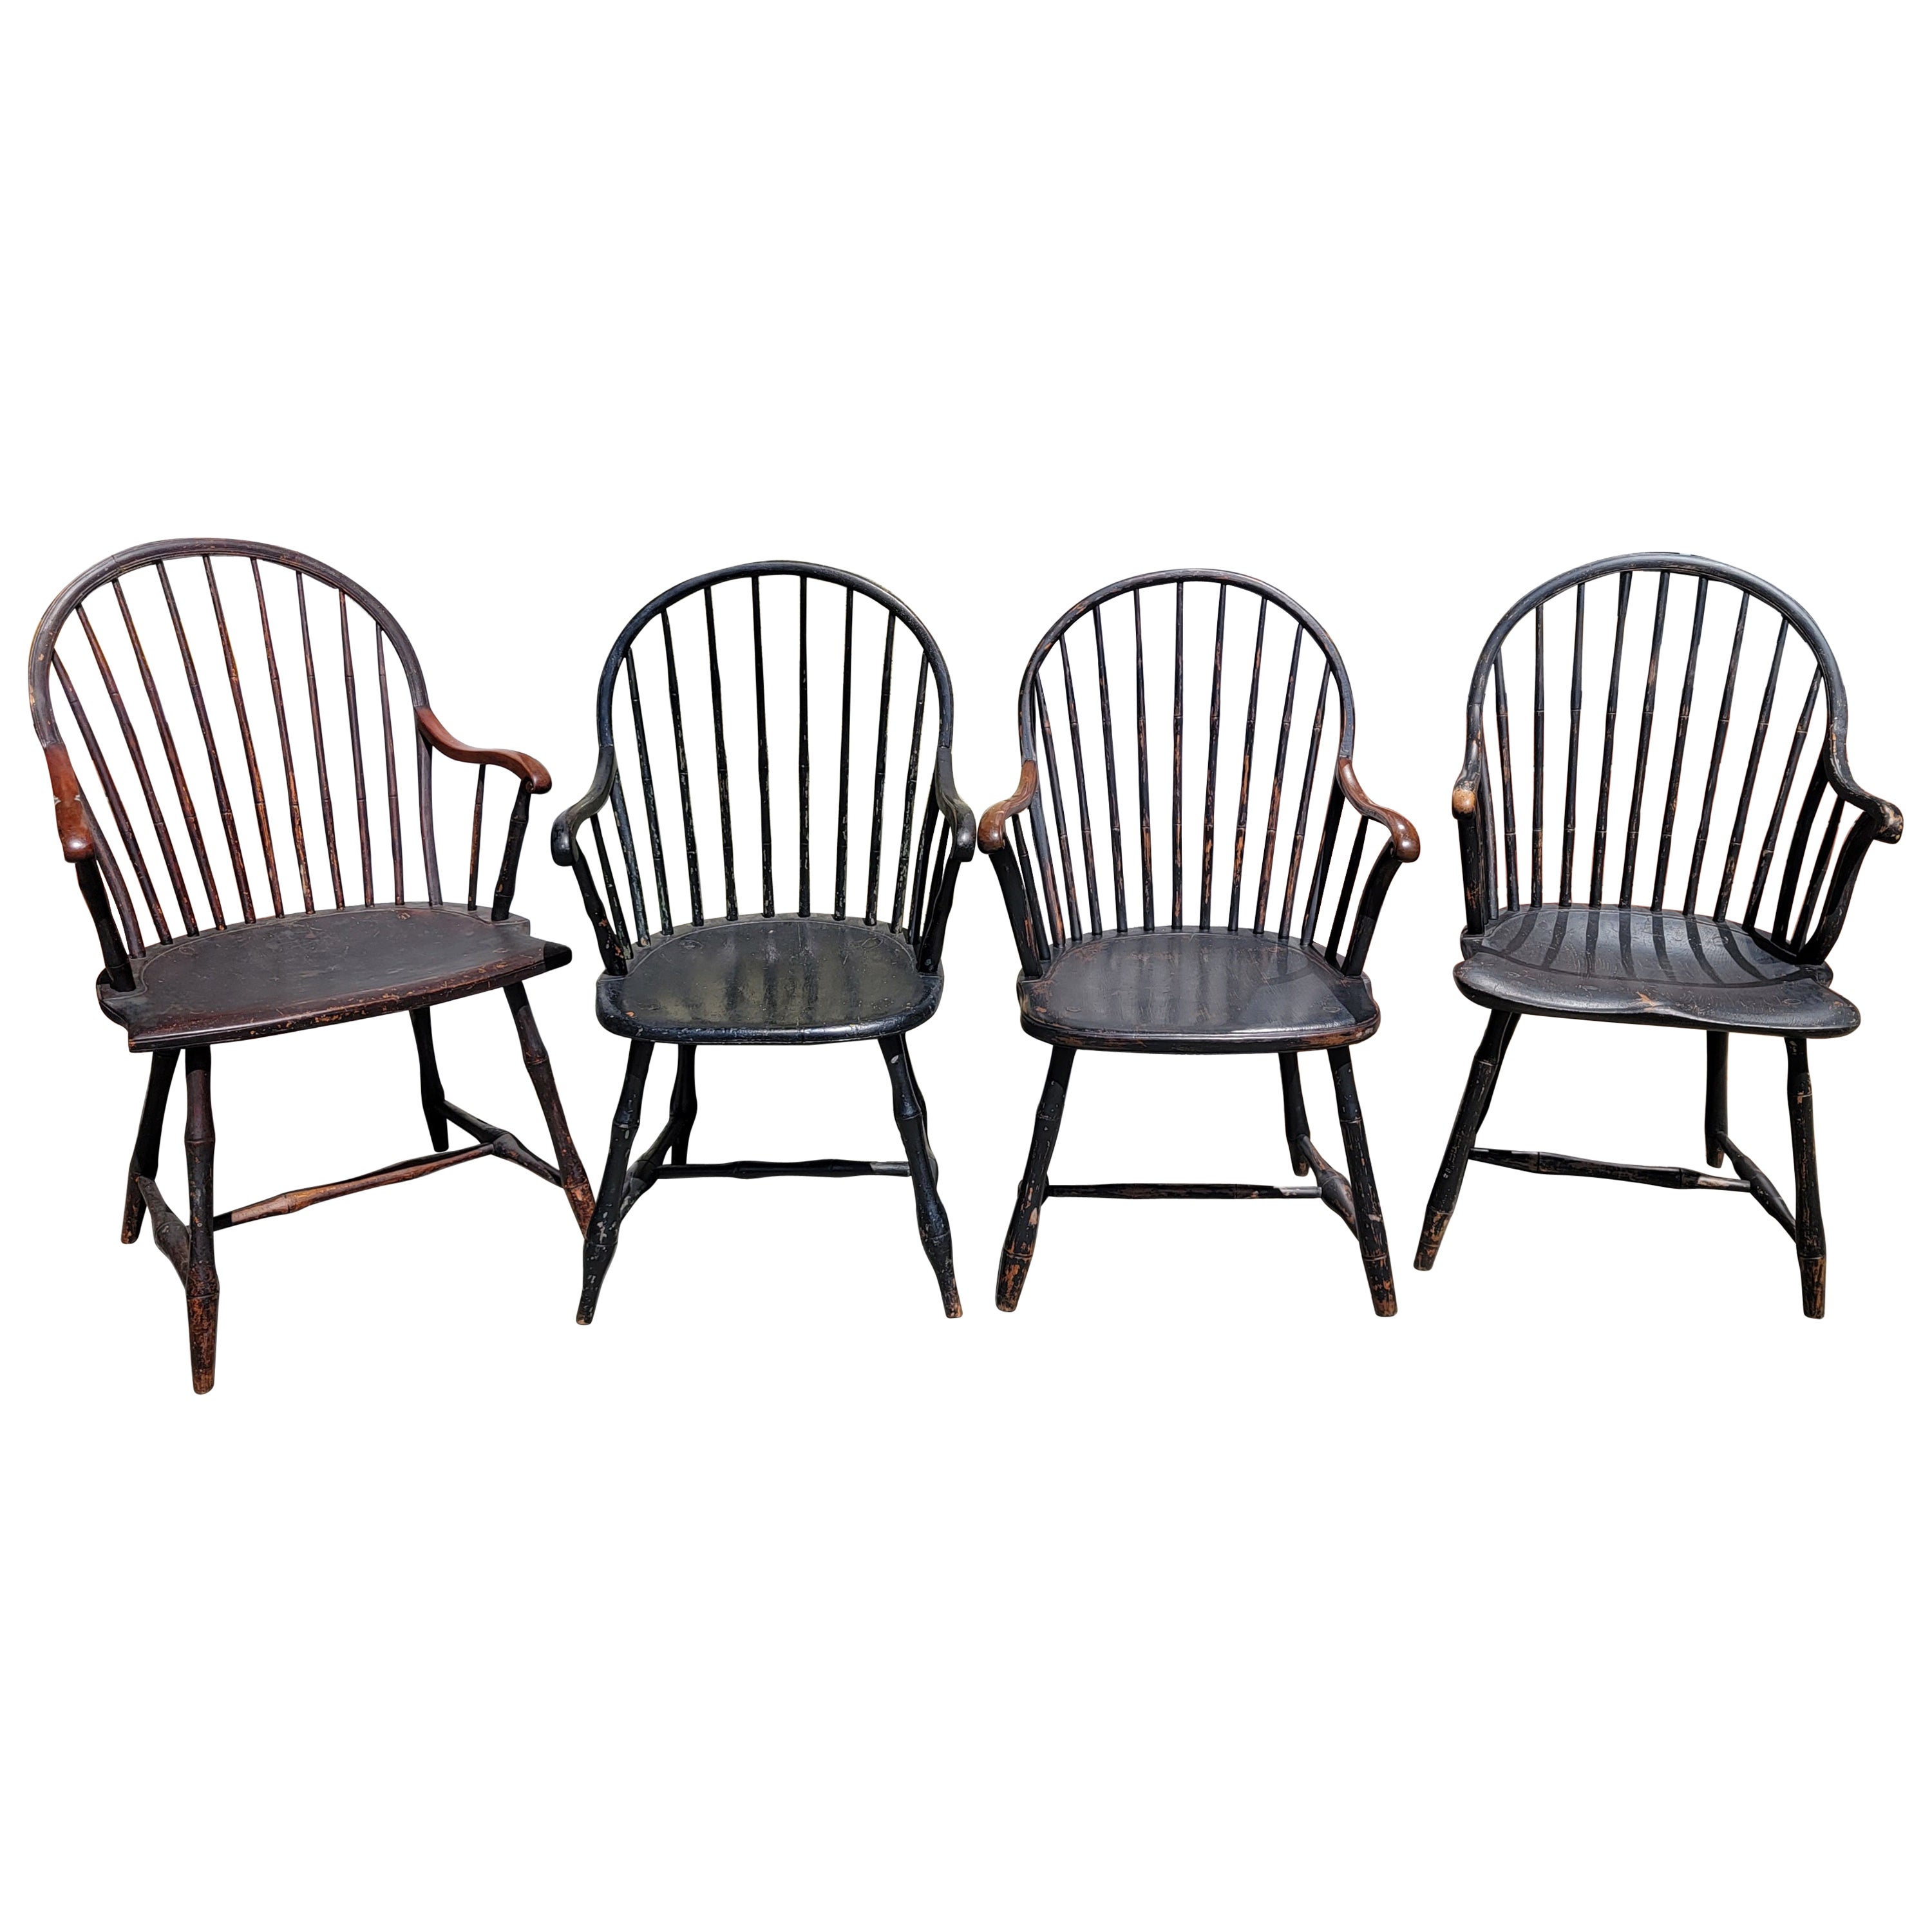 19th C Extended Scroll Arm Windsor Arm Chairs. Set of Four